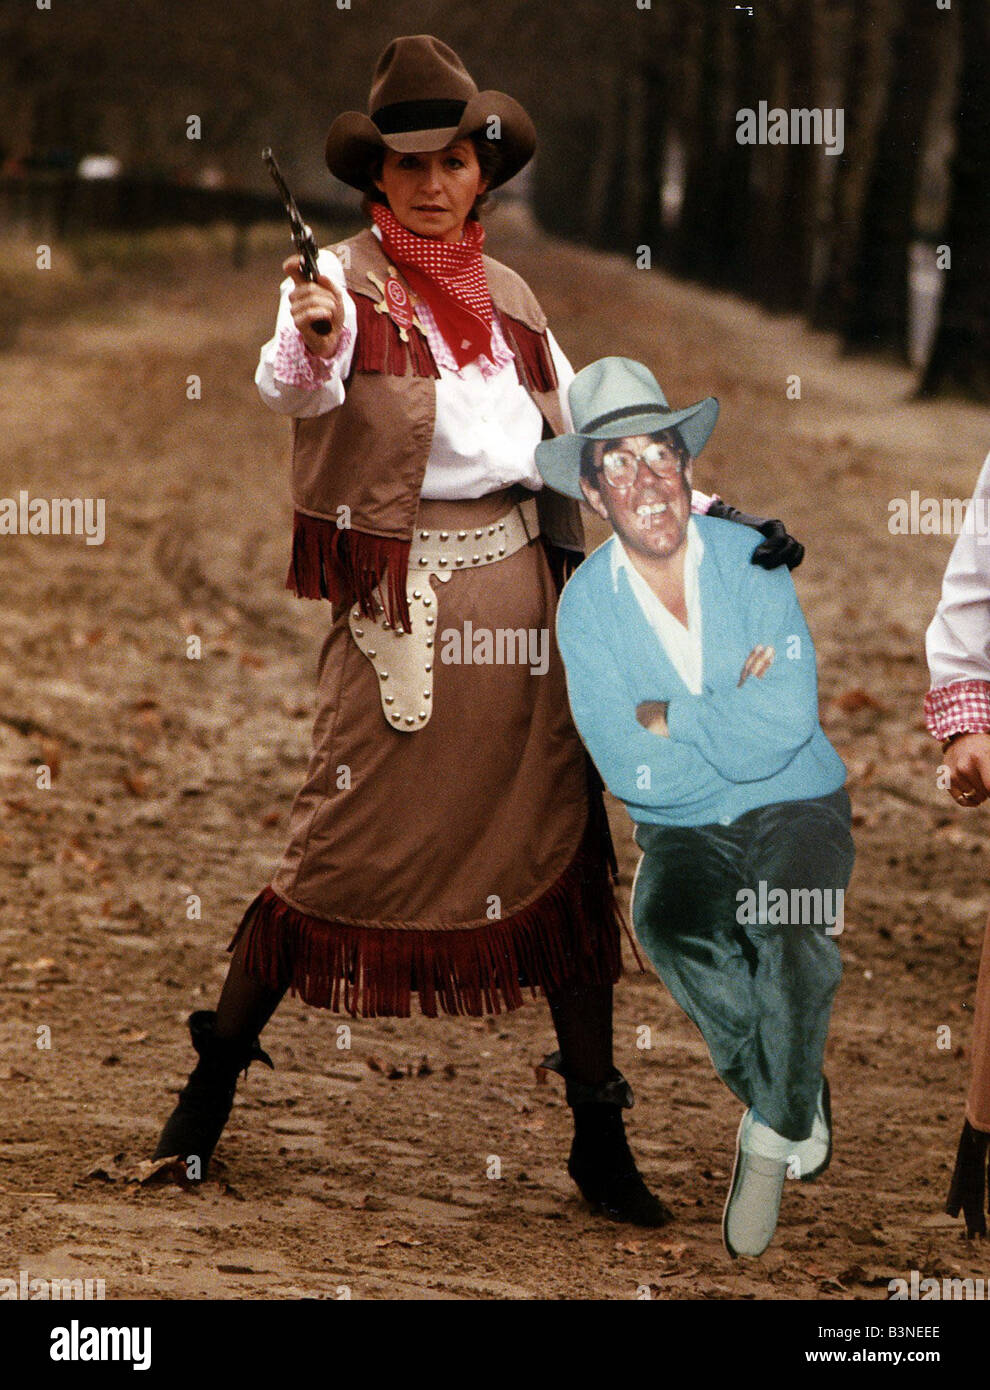 Sue Lawley TV Presenter dressed as a cowgirl with Hat and Gun holding a cardboard cutout of Ronnie Corbett January 1990 Stock Photo